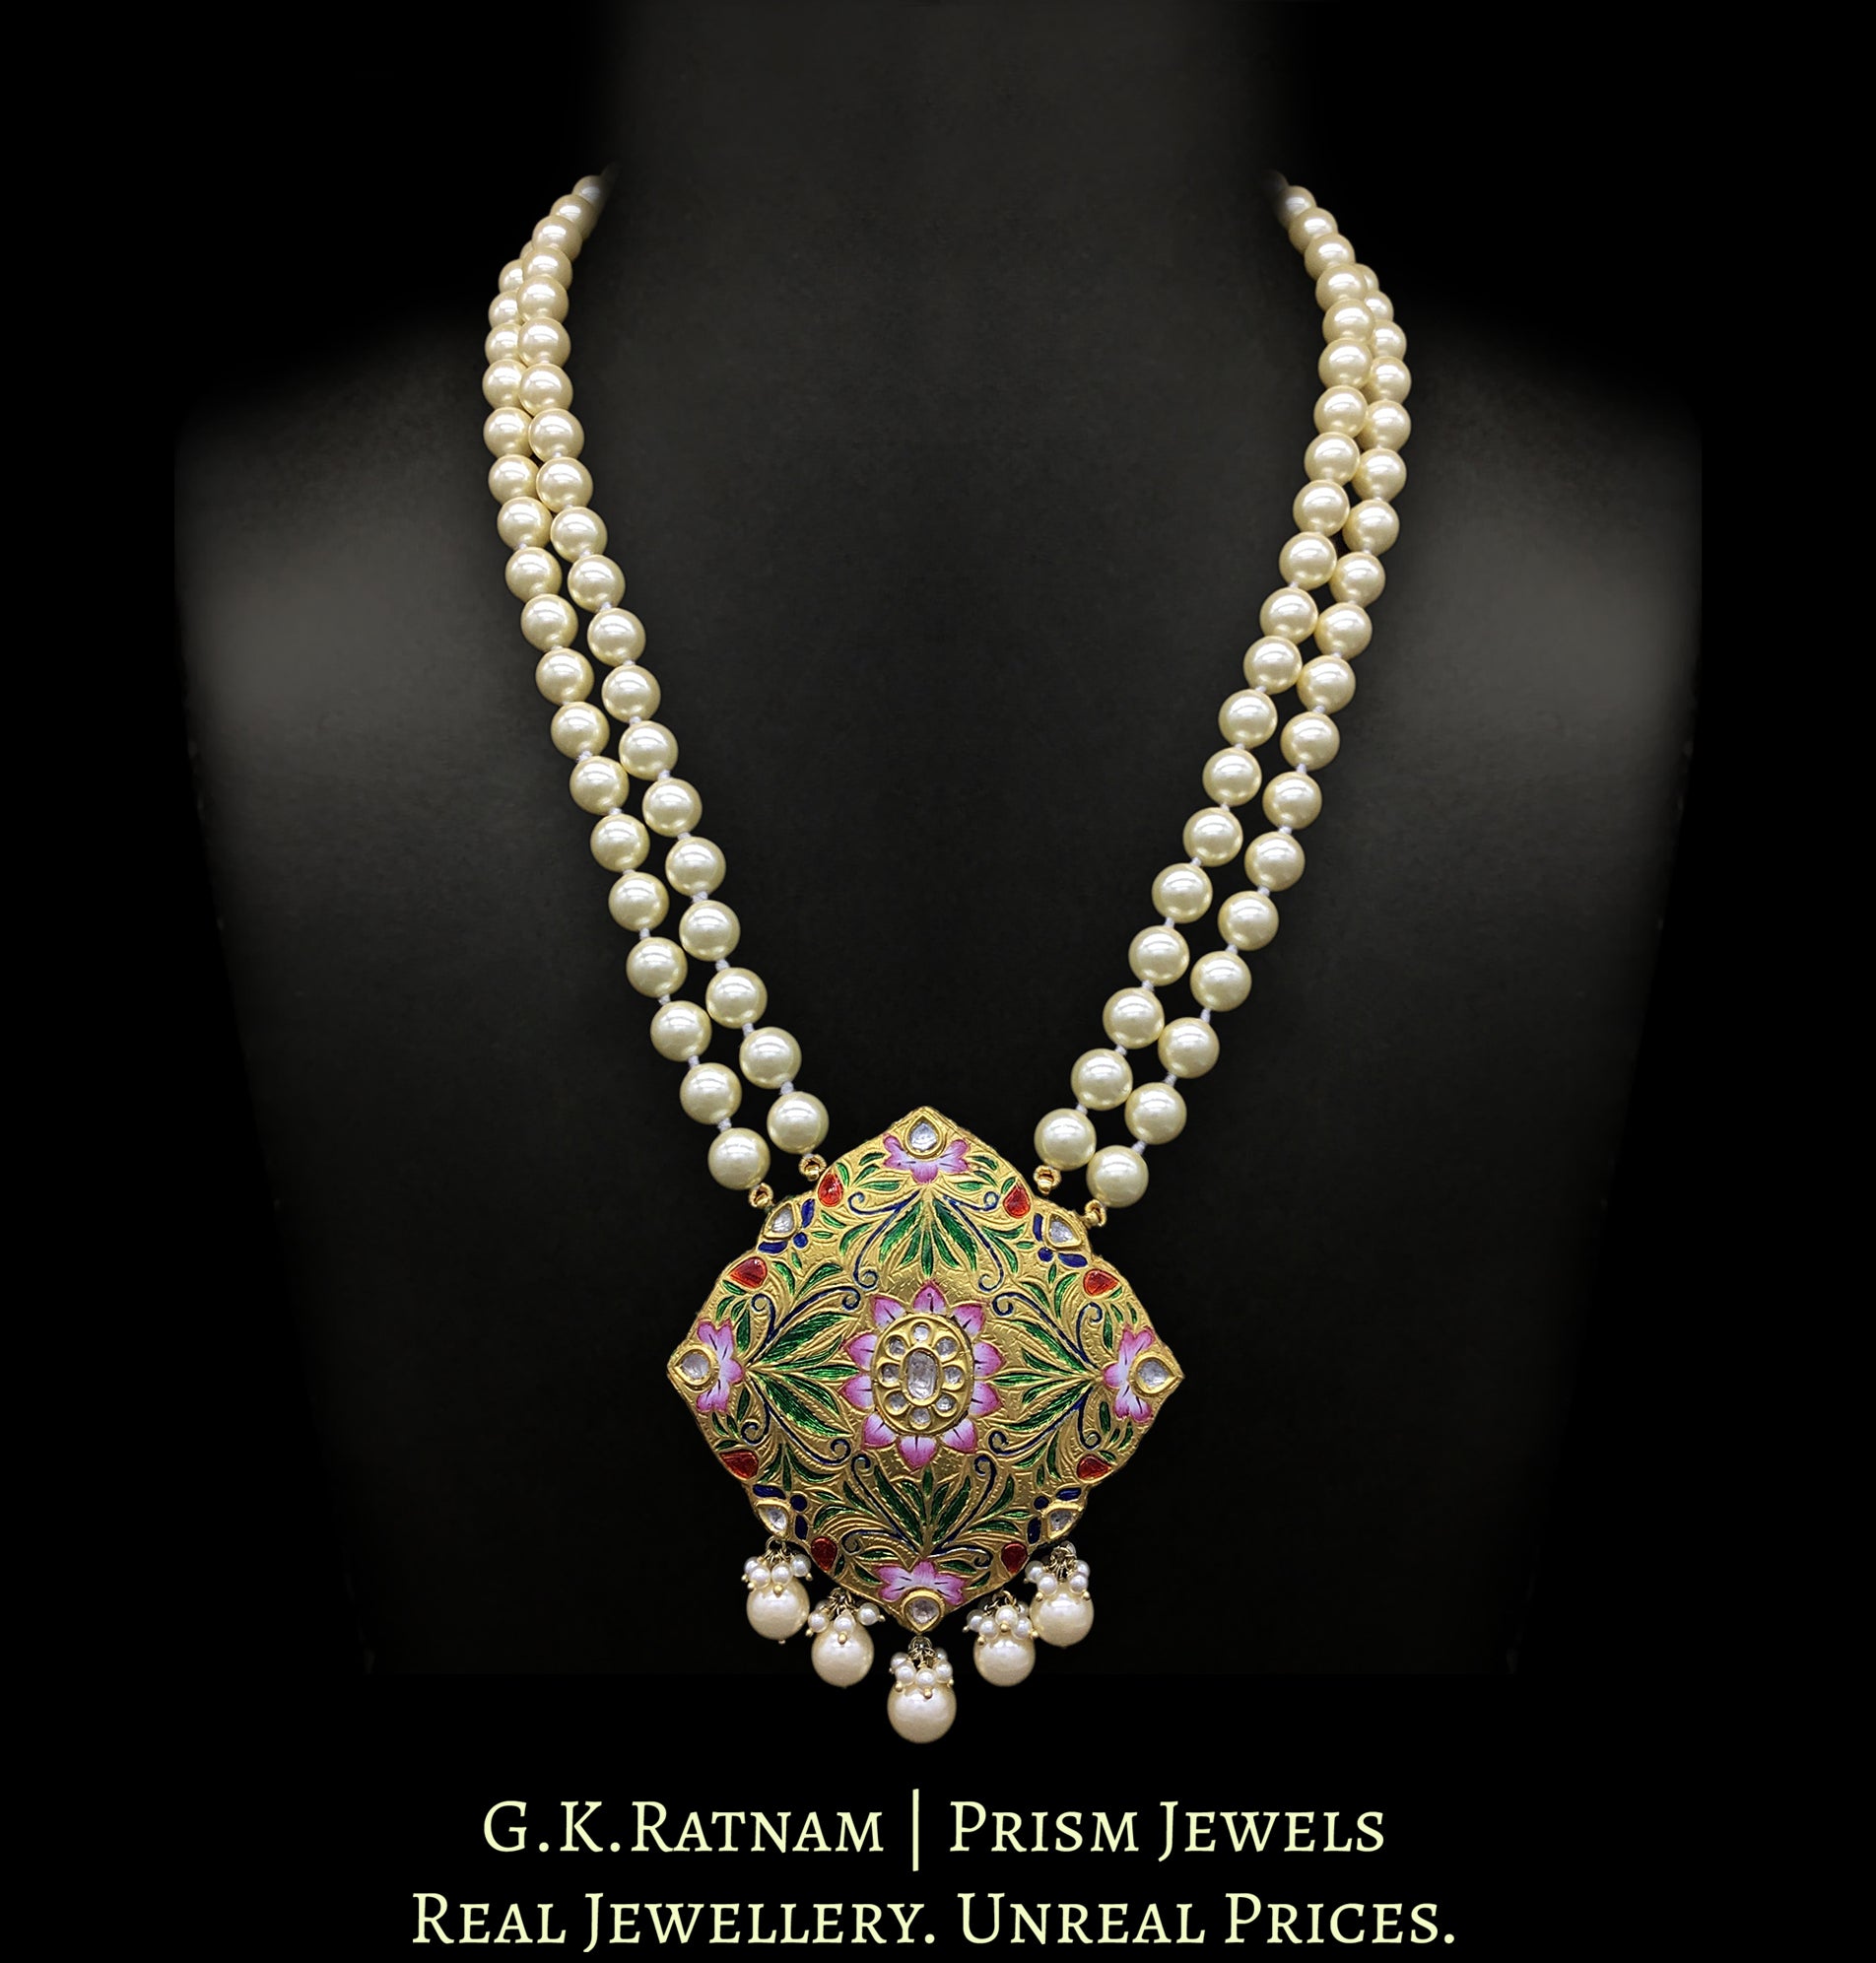 23k Gold and Diamond Polki multi-color designer Pendant with lustrous south-sea-like pearls